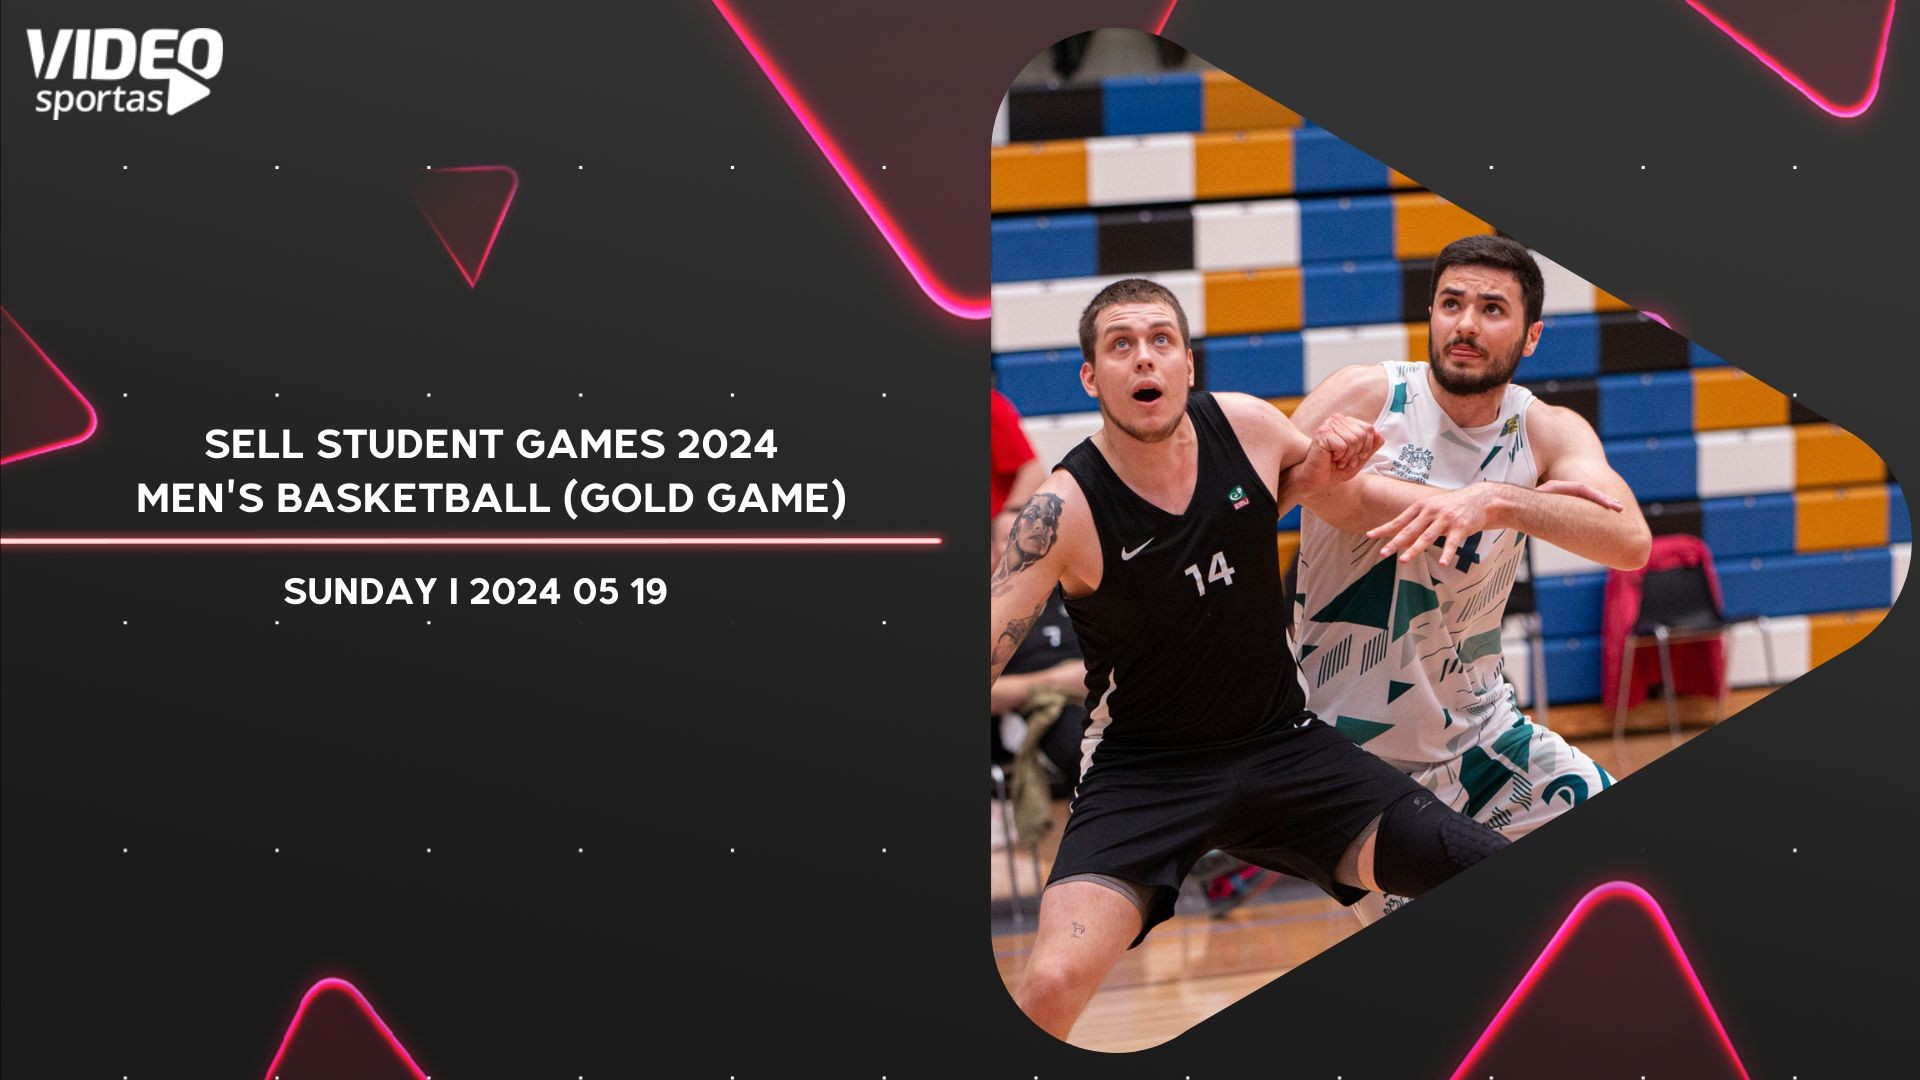 GOLD GAME - SELL STUDENT GAMES 2024 (MEN'S BASKETBALL)